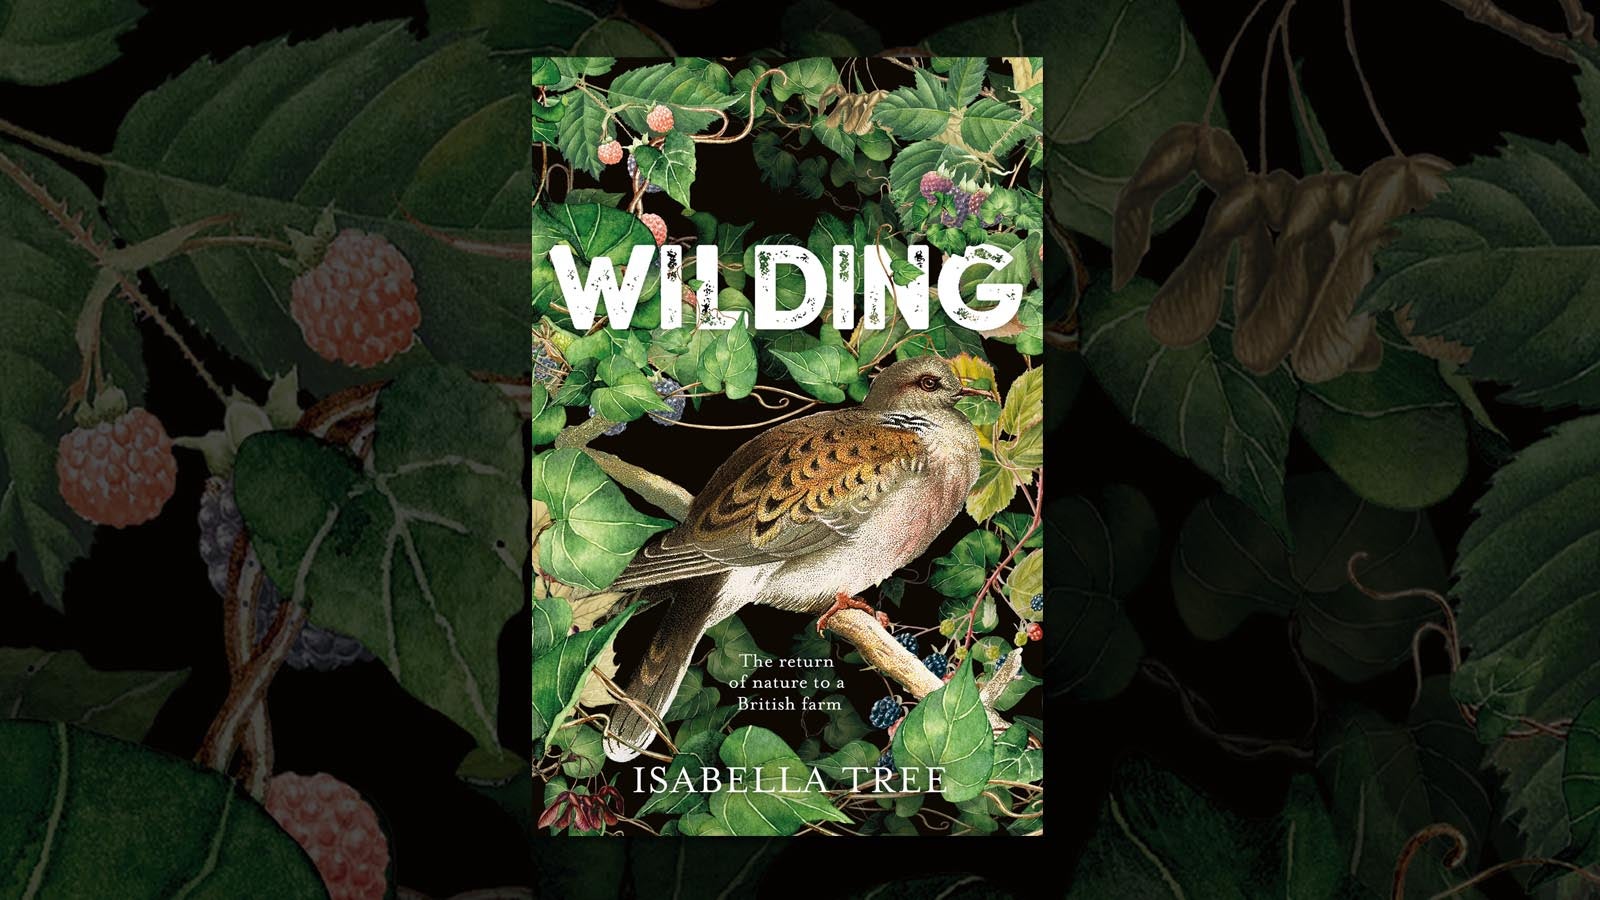 Jacket cover for Wilding by Isabella Tree , featuring a bird surrounded by foliage